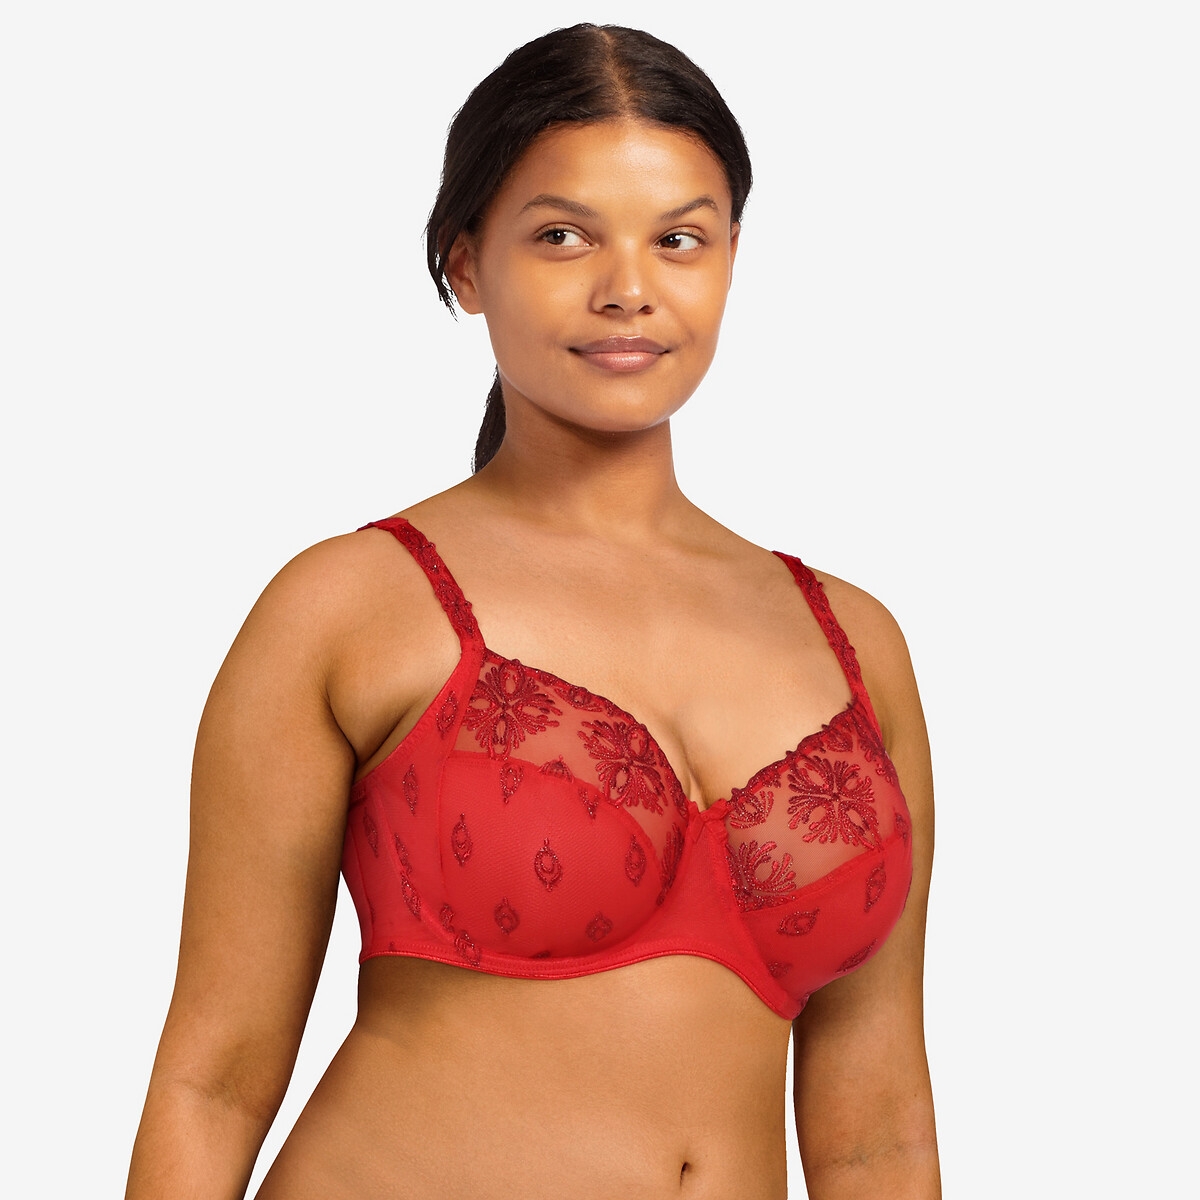 Champs Elysées Full Cup Bra with Underwiring